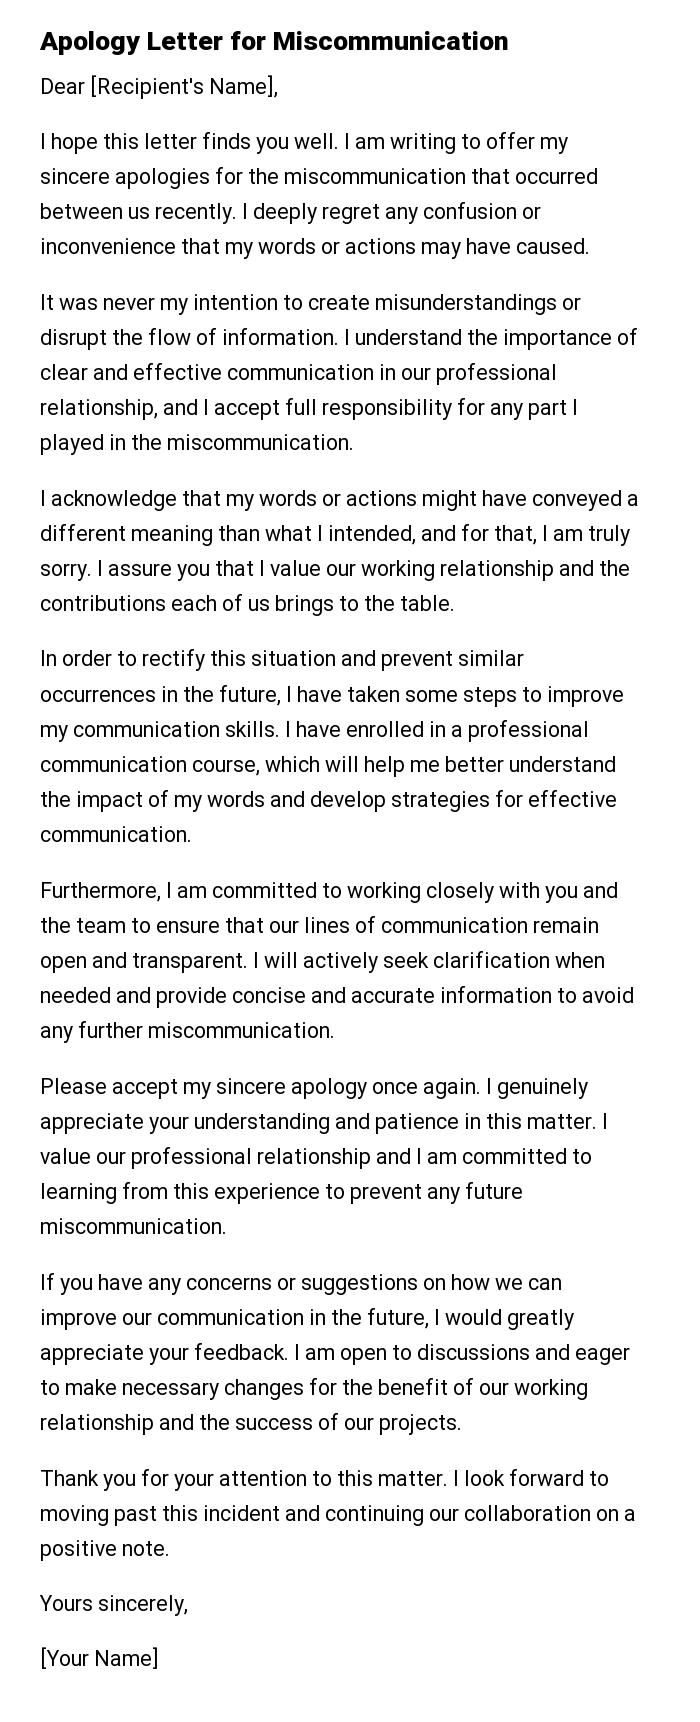 Apology Letter for Miscommunication